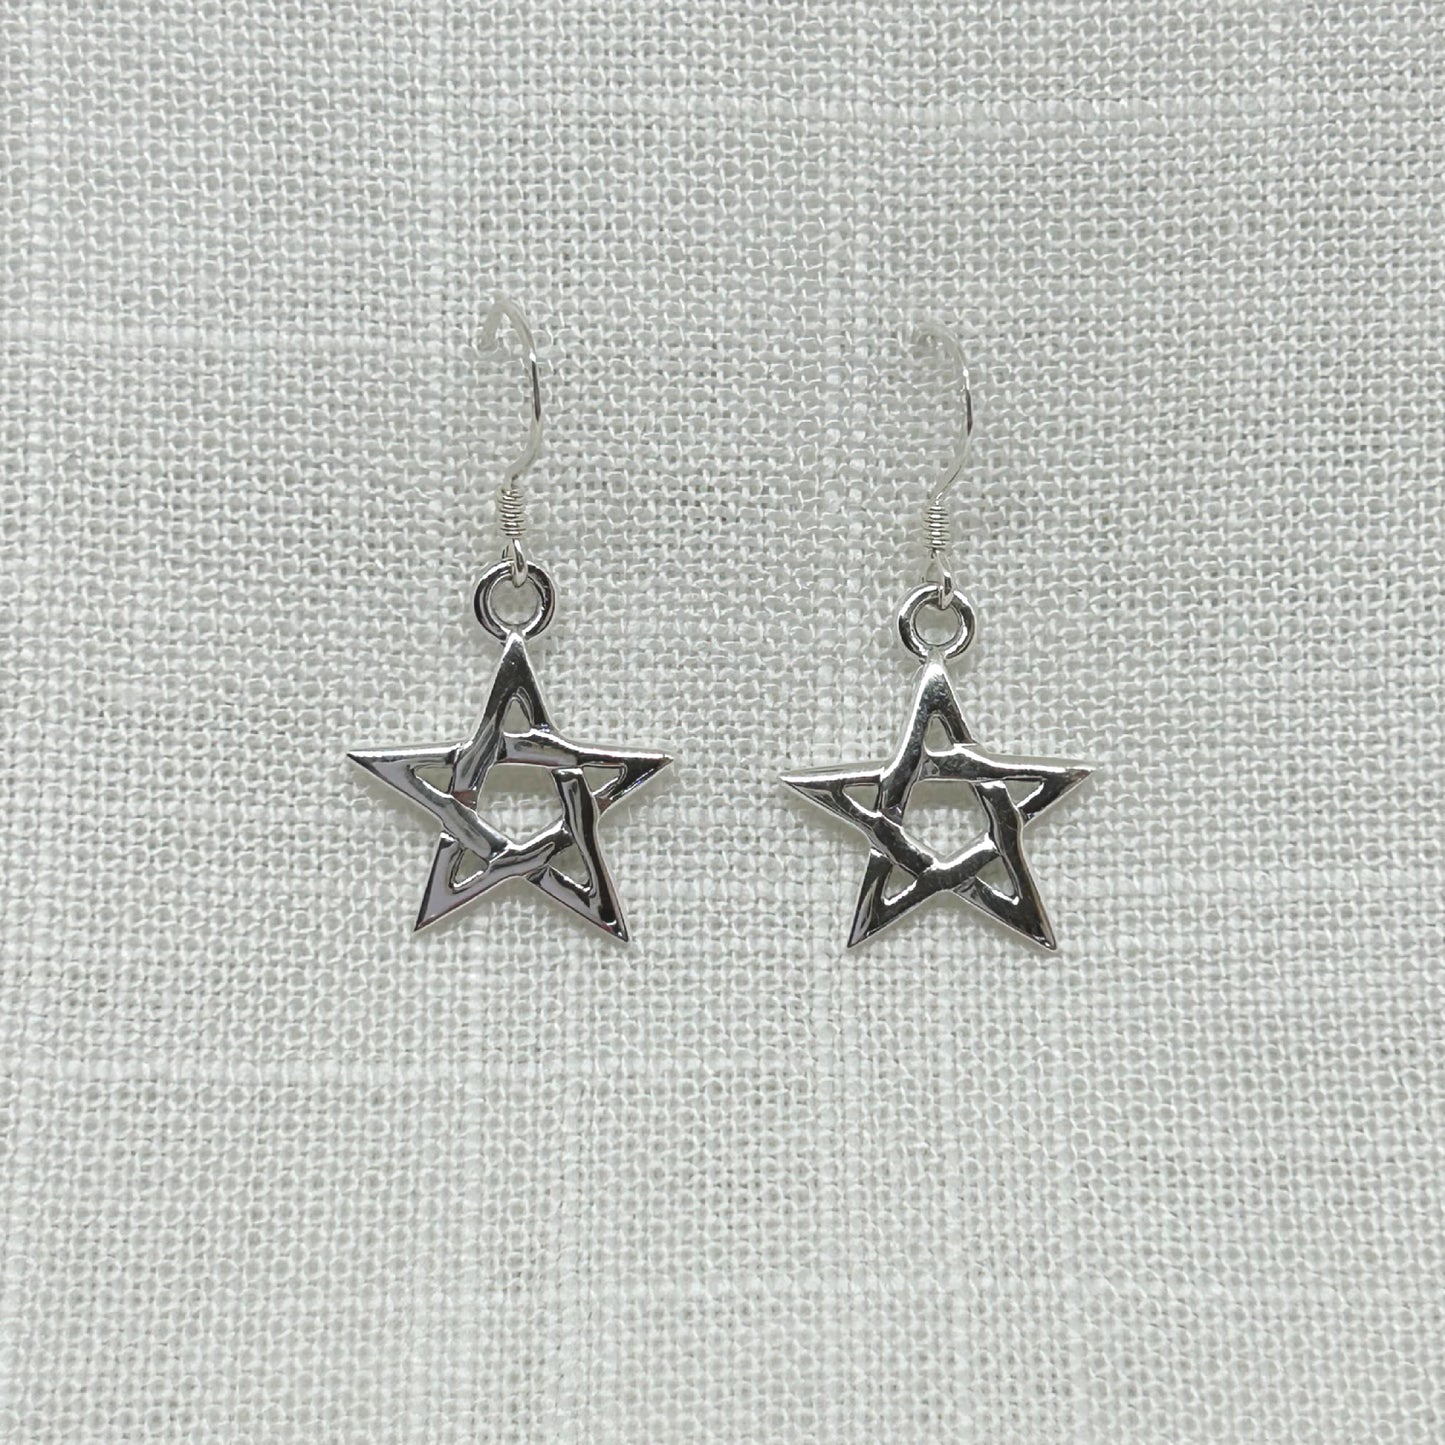 These beautiful silver pentagram earrings have a high polish so they look stunning. They are approx 1.75cm wide by 3.25cm long incl hooks. All earrings are non returnable due to hygiene reasons